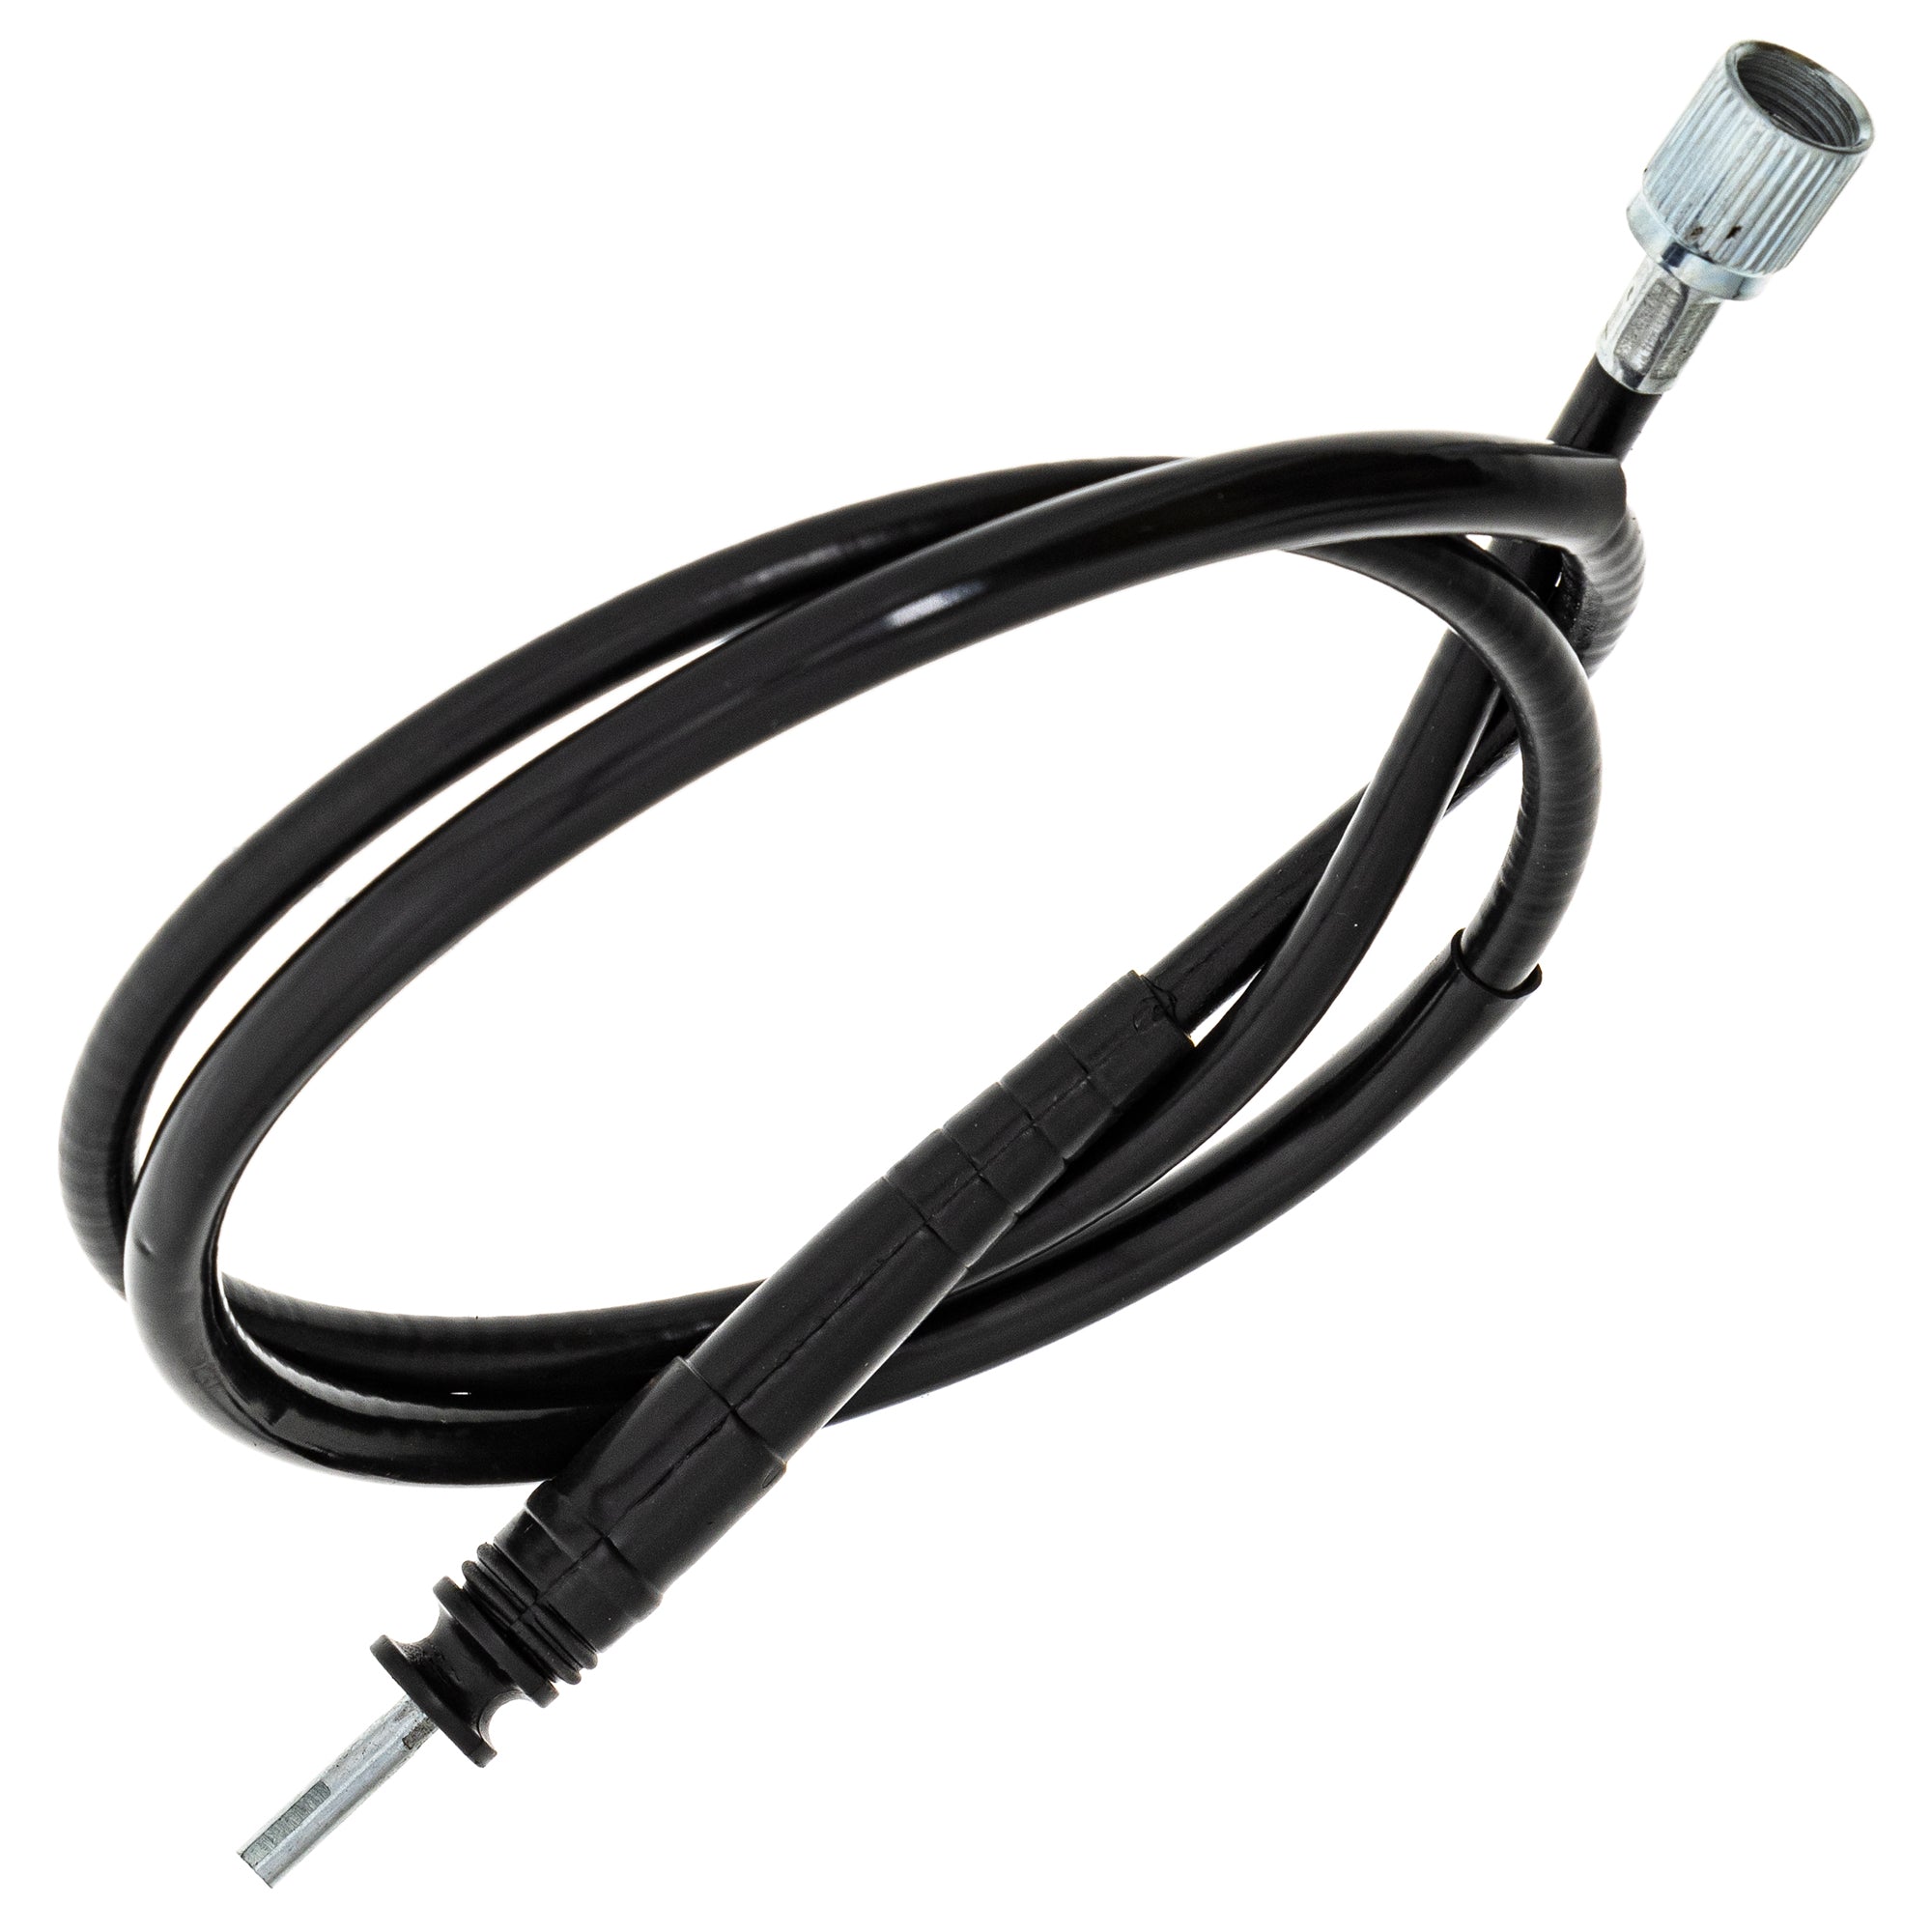 Speedometer Cable For Honda 44830-MY6-670 44830-MS2-000 44830-MG7-000 44830-MG2-000 44830-MB7-611